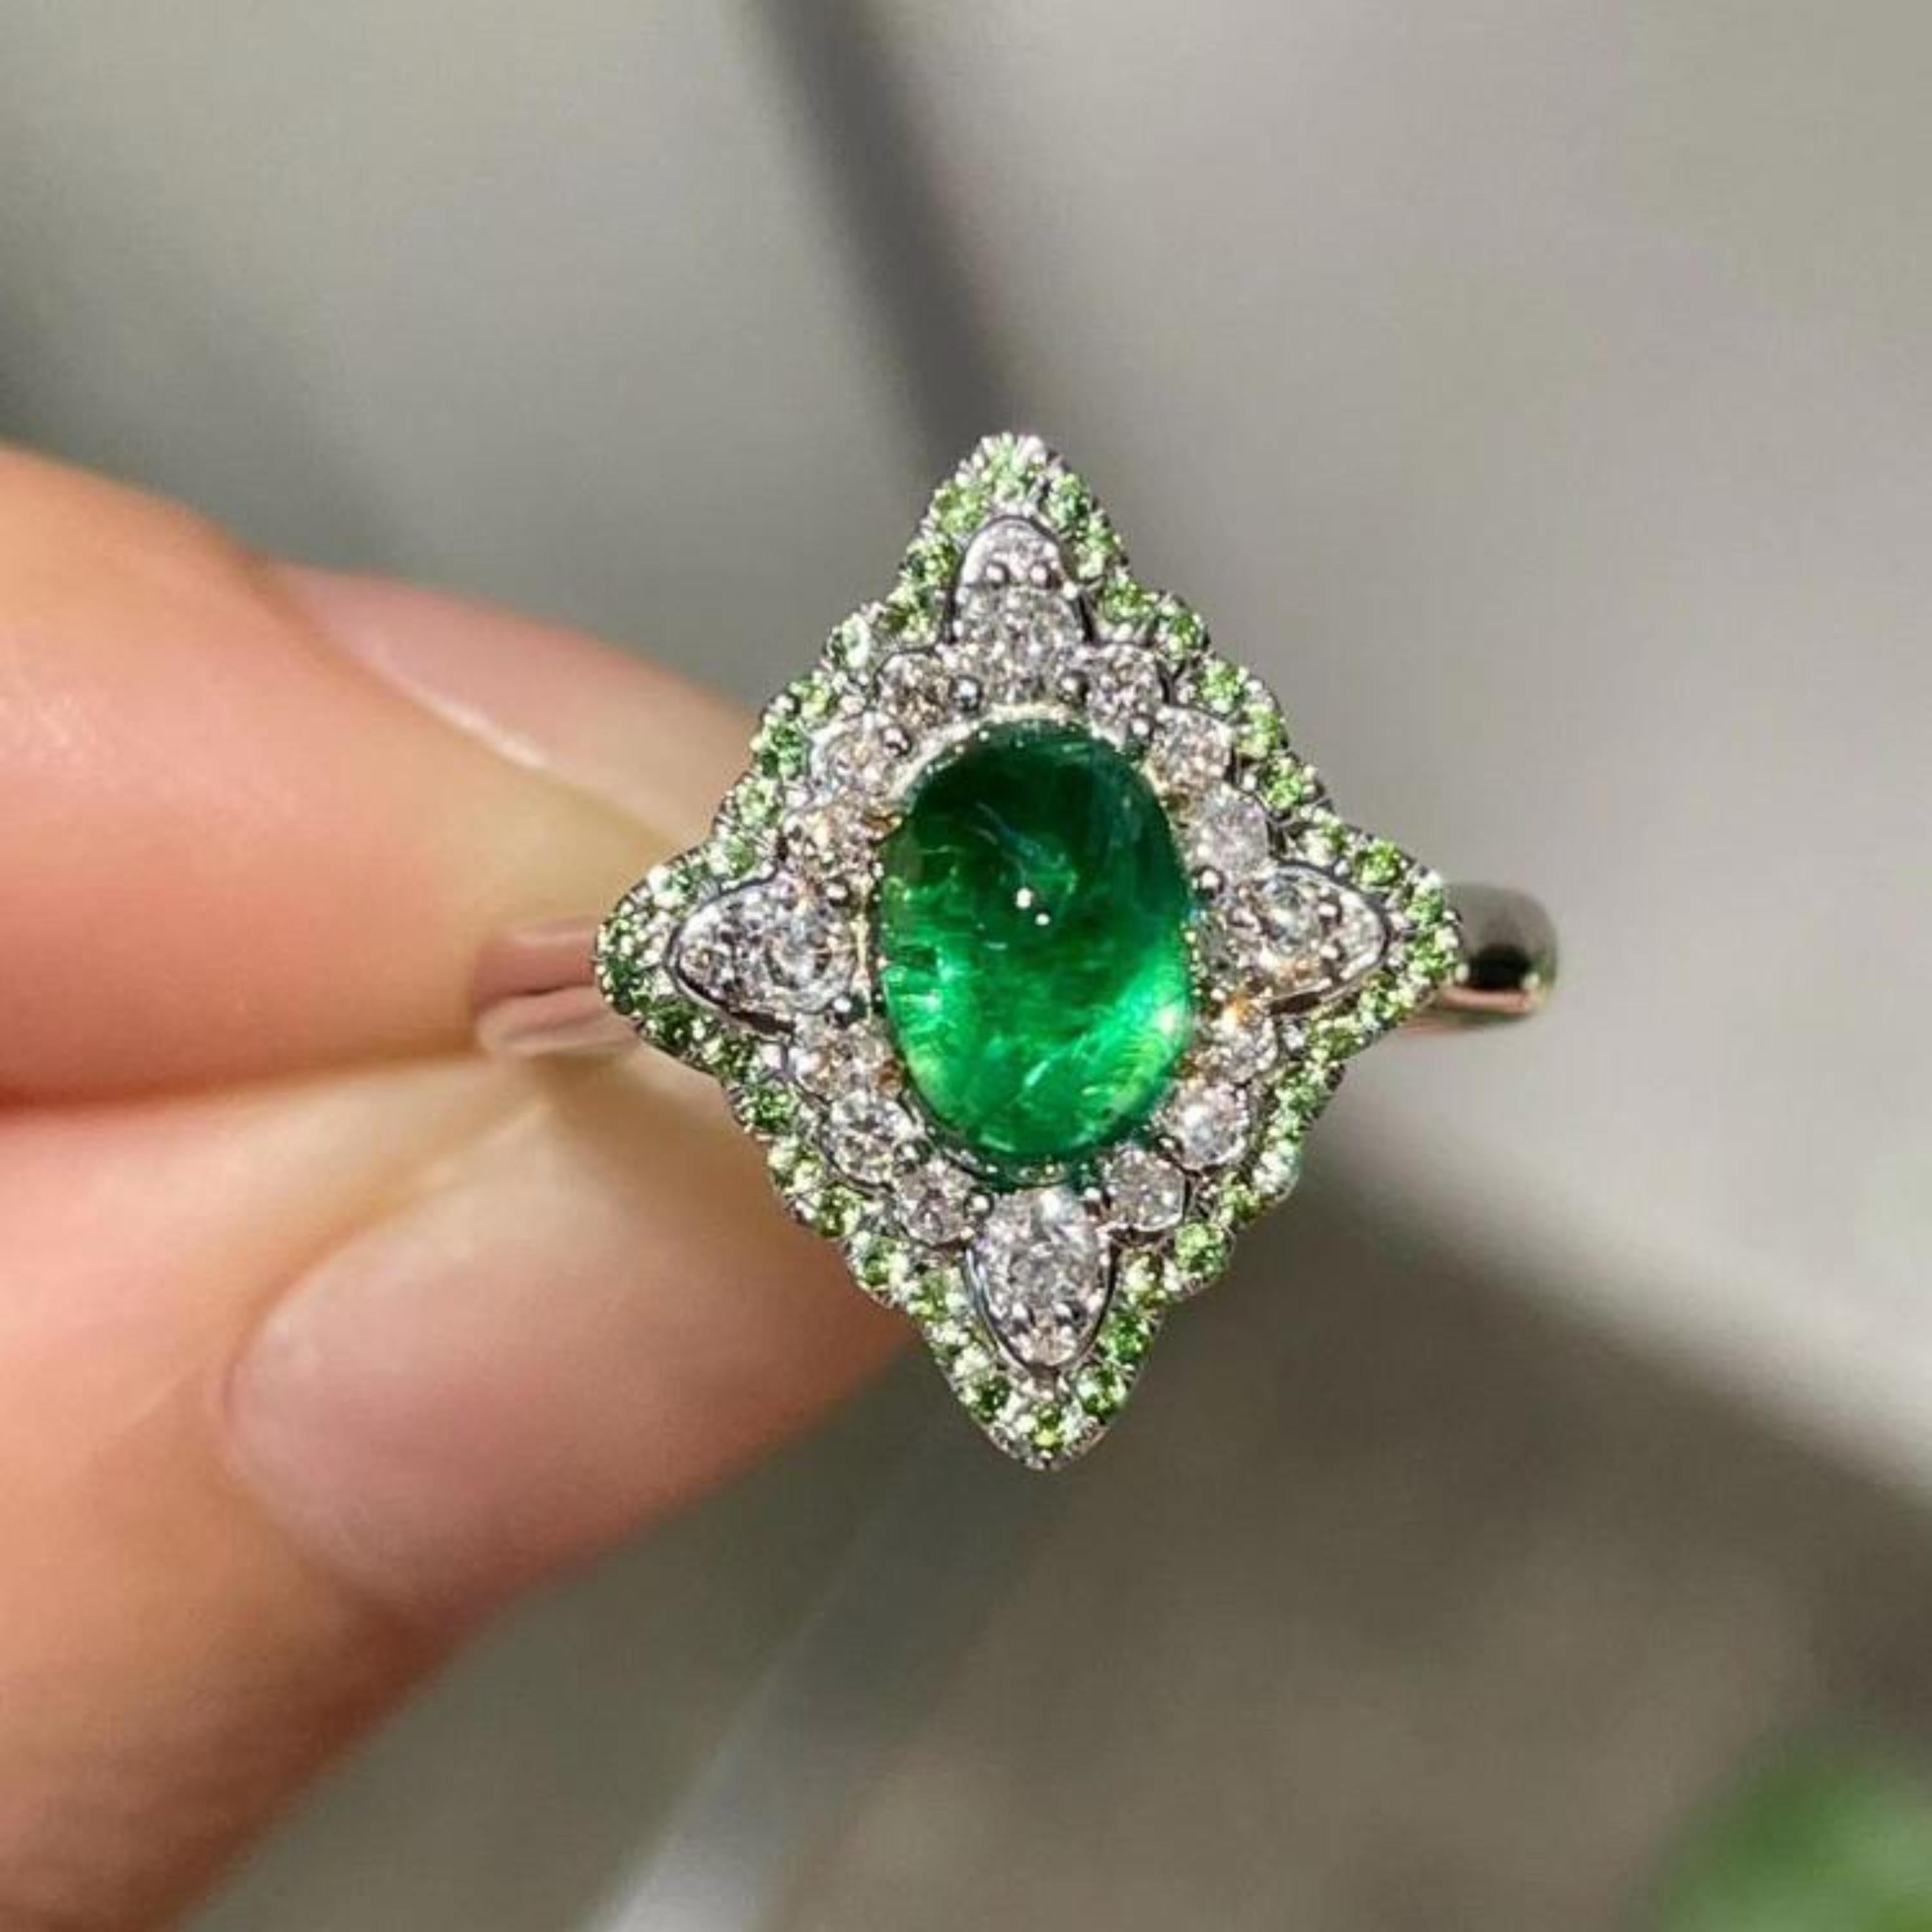 Certified 2 Carat Natural Emerald Diamond Engagement Ring, Unique Cocktail Ring

A stunning ring featuring IGI/GIA Certified 2.11 Carat Natural Emerald and 0.41 Carats of Diamond Accents set in 18K Solid Gold.

Emeralds are highly valued for their